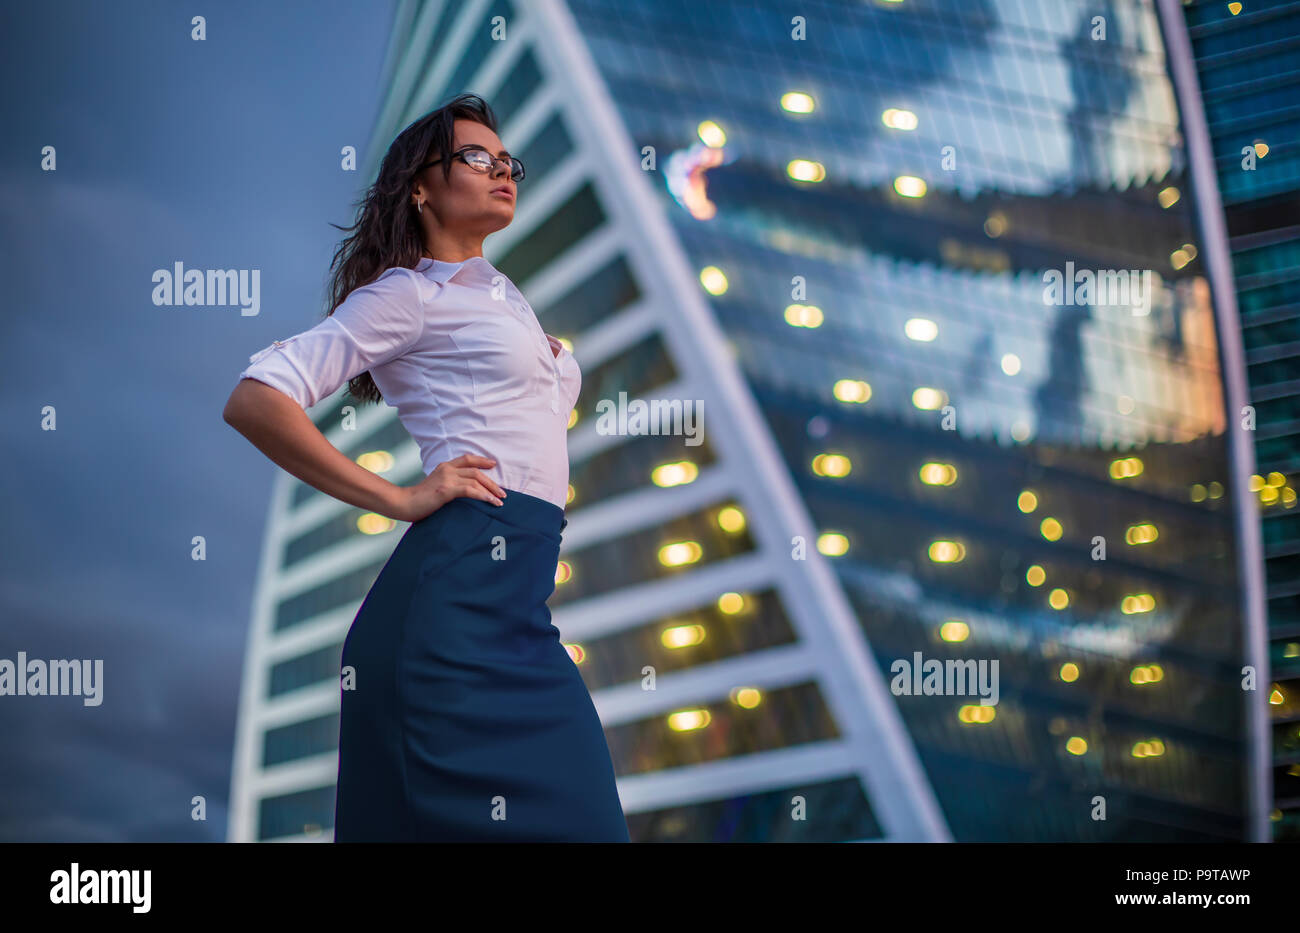 Brunette model wearing glasses, white shirt, grey-blue skirt, standing against business city reflected skyscraper with evening lights flares in window Stock Photo